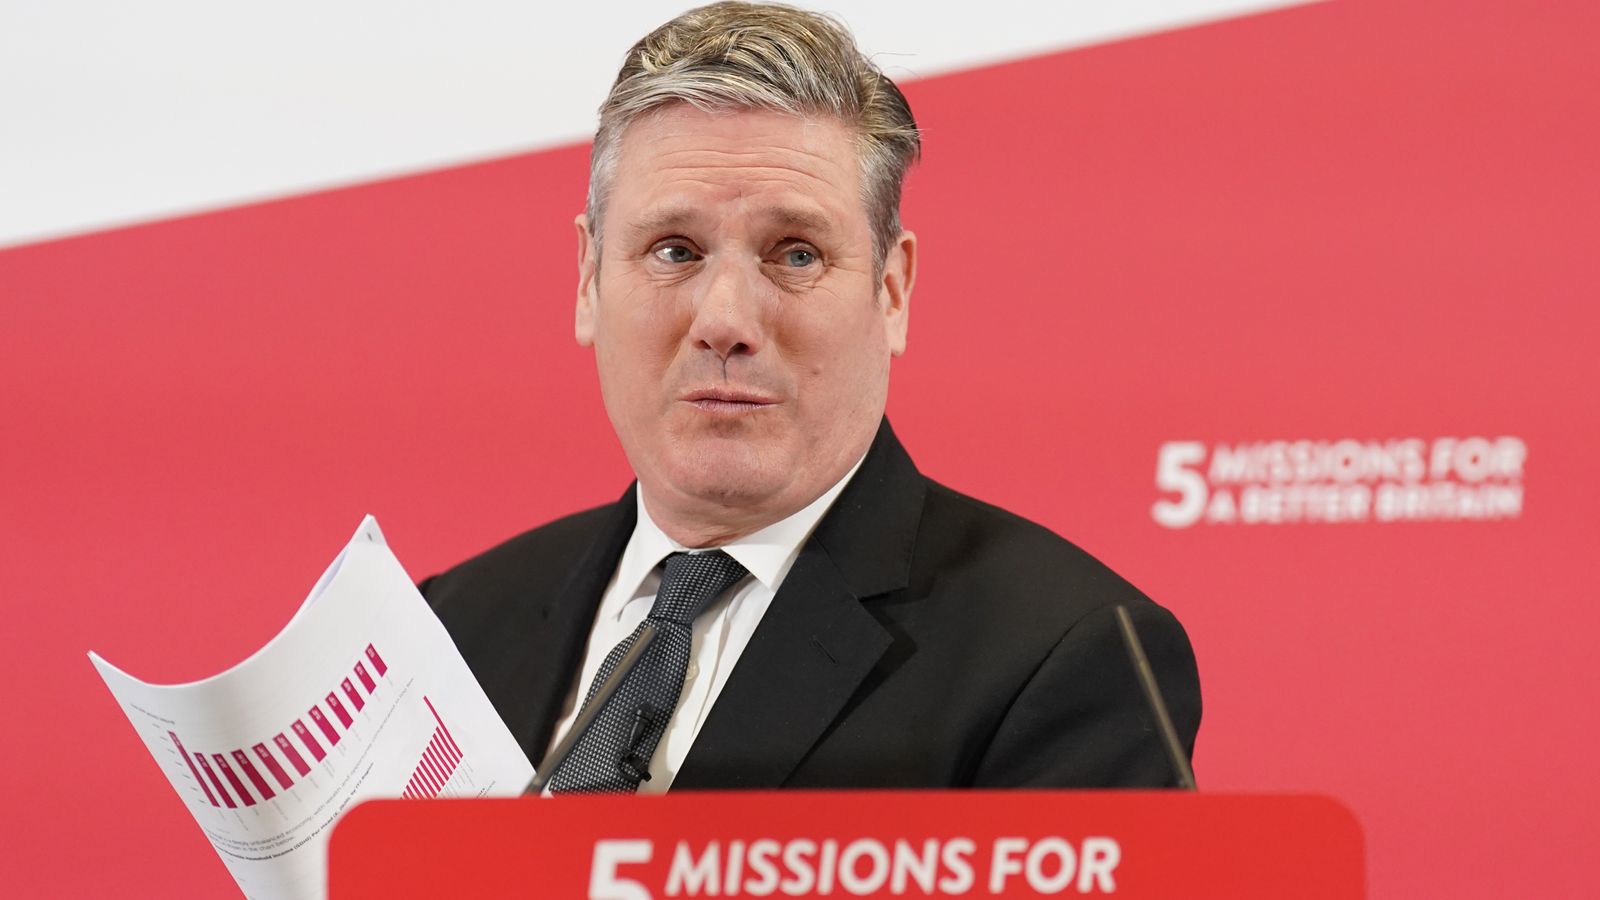 Sir Keir Starmer sets out Labour's plan to secure highest growth in G7 as he calls on voters to judge party by backing him